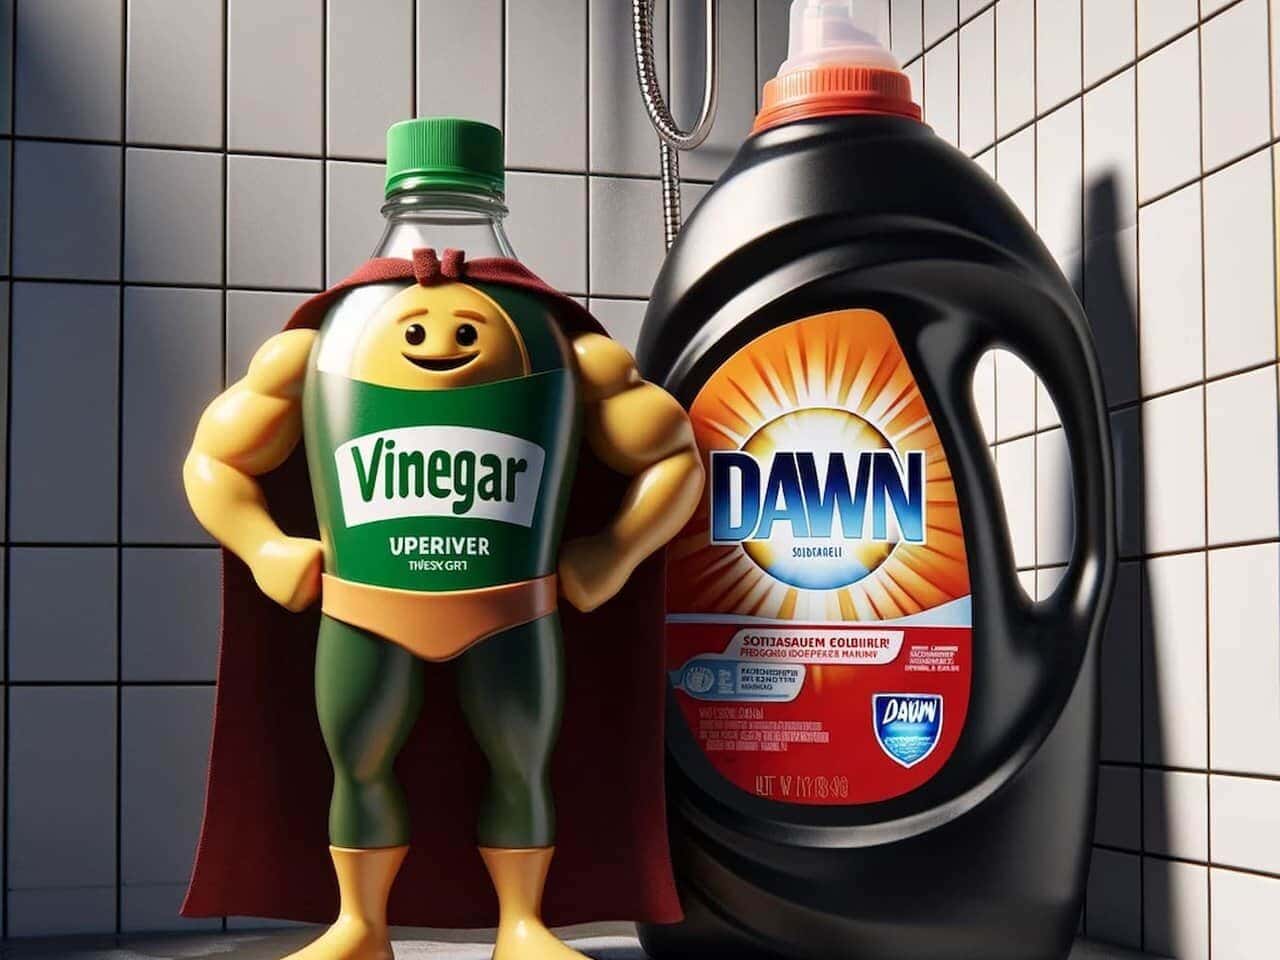 Dawn and vinegar shower cleaner is depicted Anthropomorphic Dawn dish detergent and vinegar bottles with superhero capes standing in a shower, representing a homemade cleaning solution for battling bathroom dirt and grime.